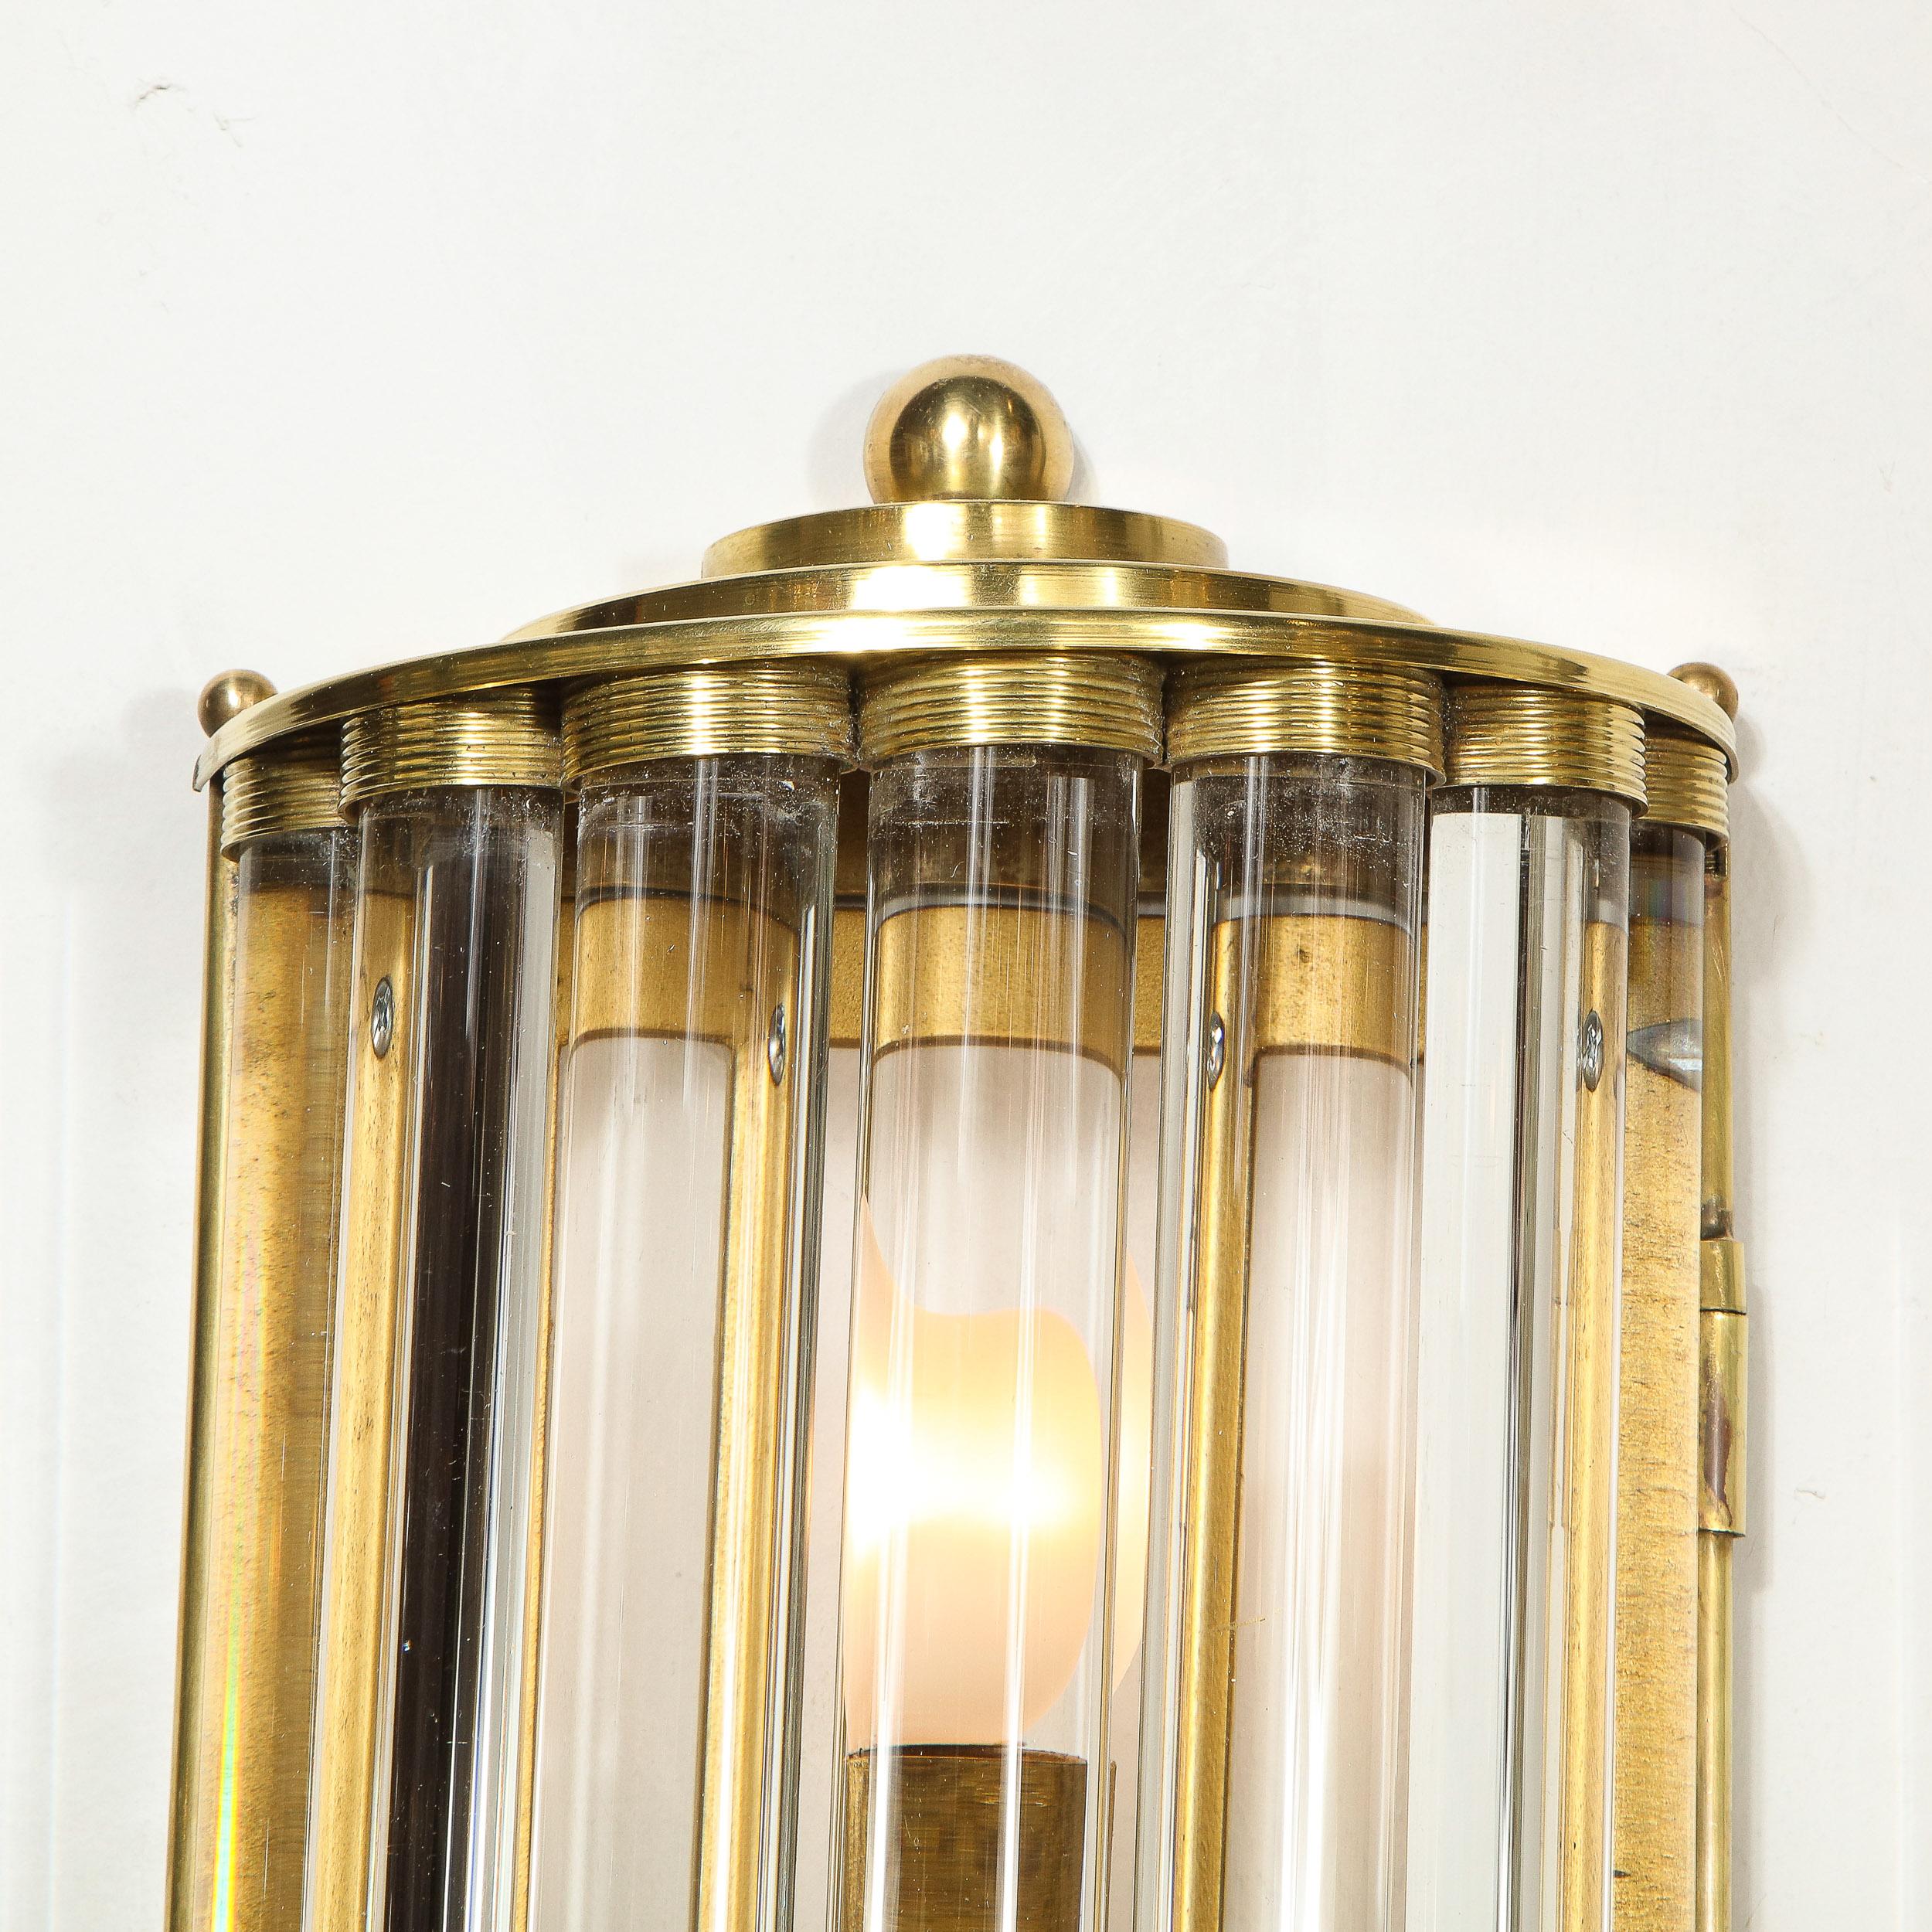 Pair of Art Deco Handblown Murano Glass Rod and Brass Sconces Signed by Venini  For Sale 2